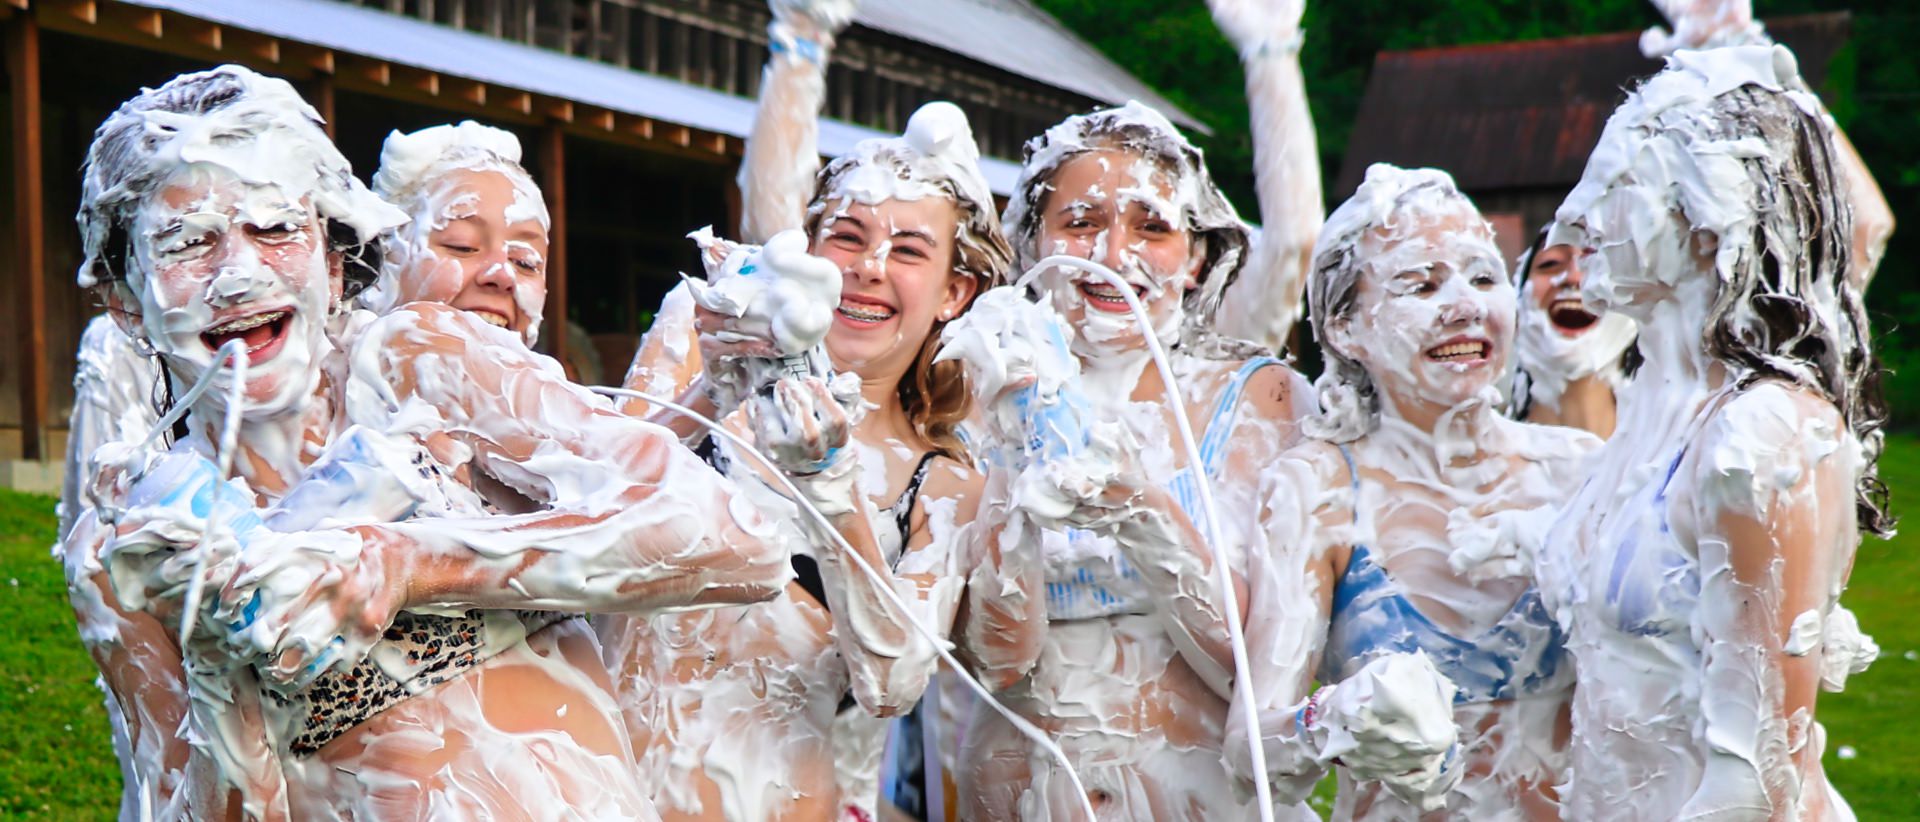 dillan russell recommends Girls Covered In Shaving Cream